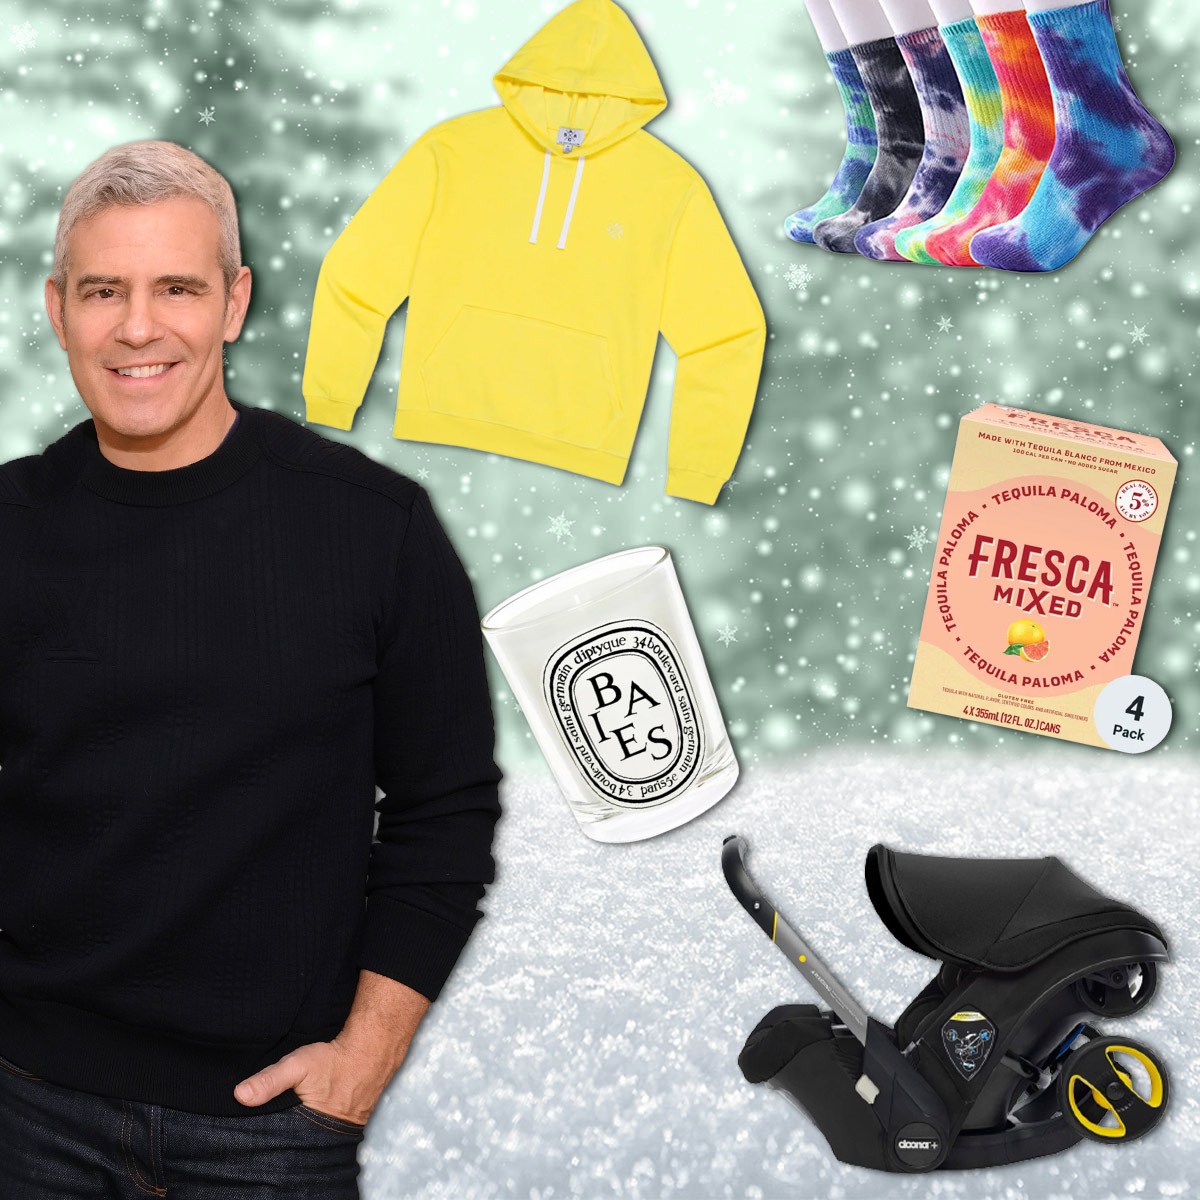 Andy Cohen’s Gift Guide Includes a Useful Pick From Khloe Kardashian and Presents for Real Housewives – E! Online